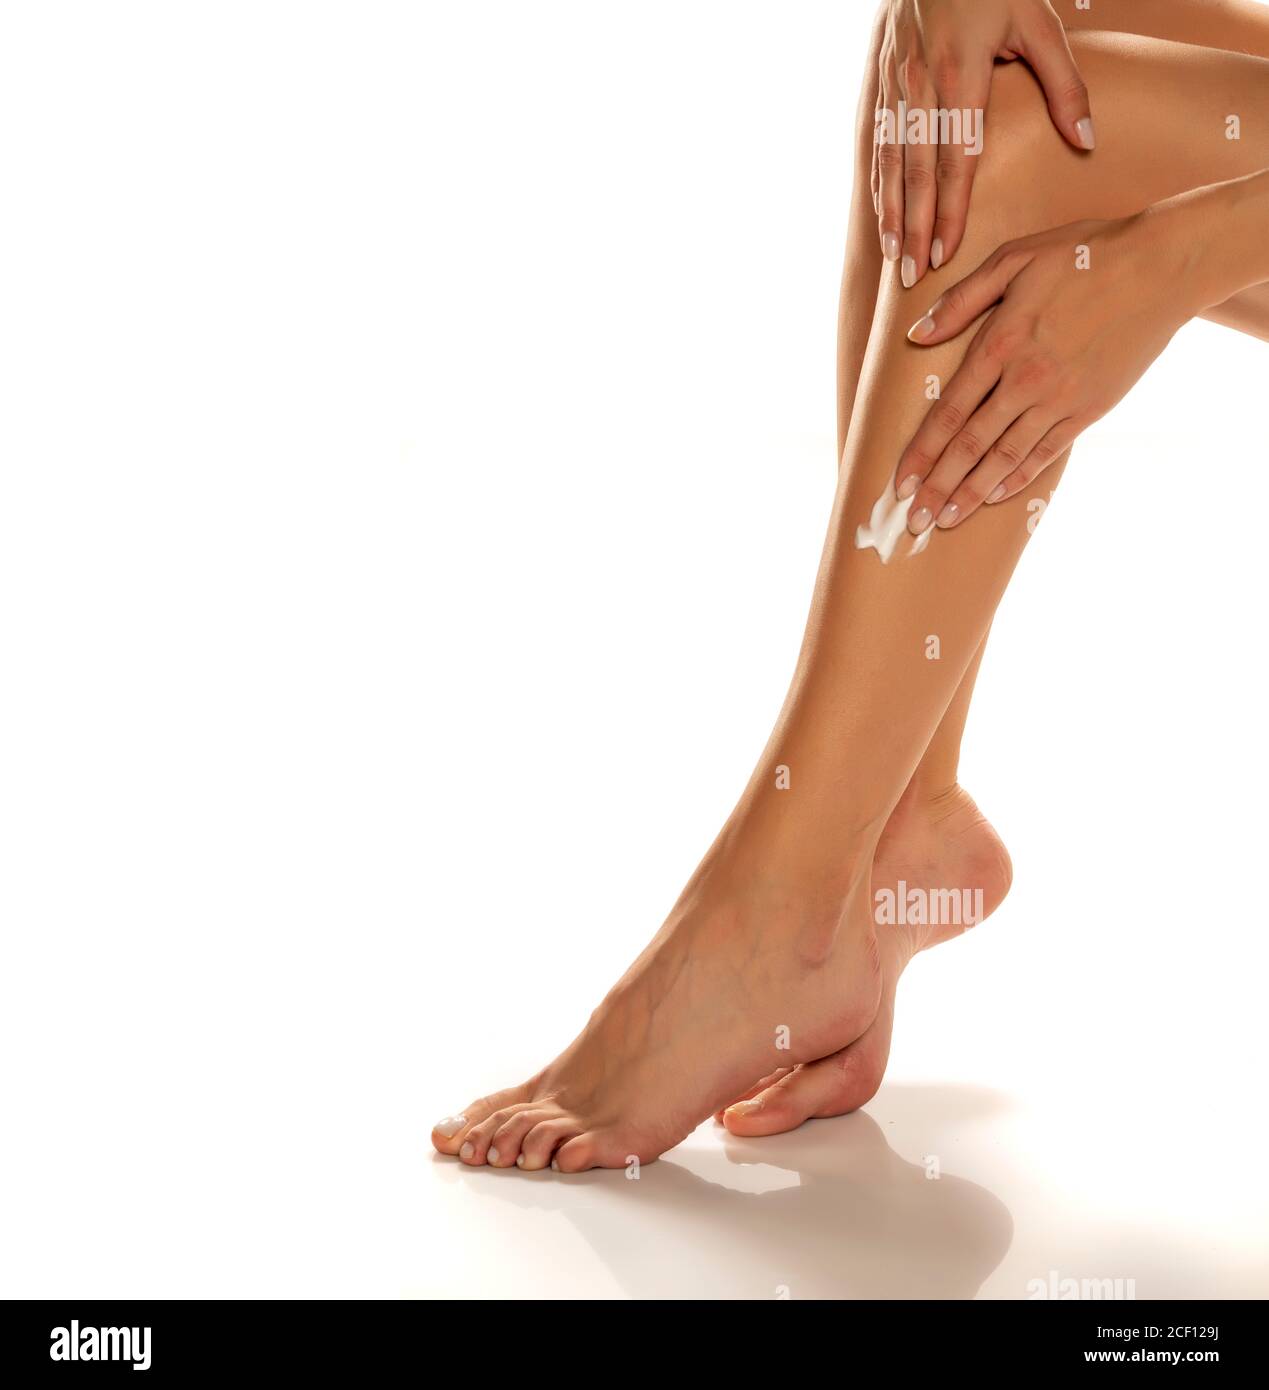 woman applying lotion on her legs on white background Stock Photo